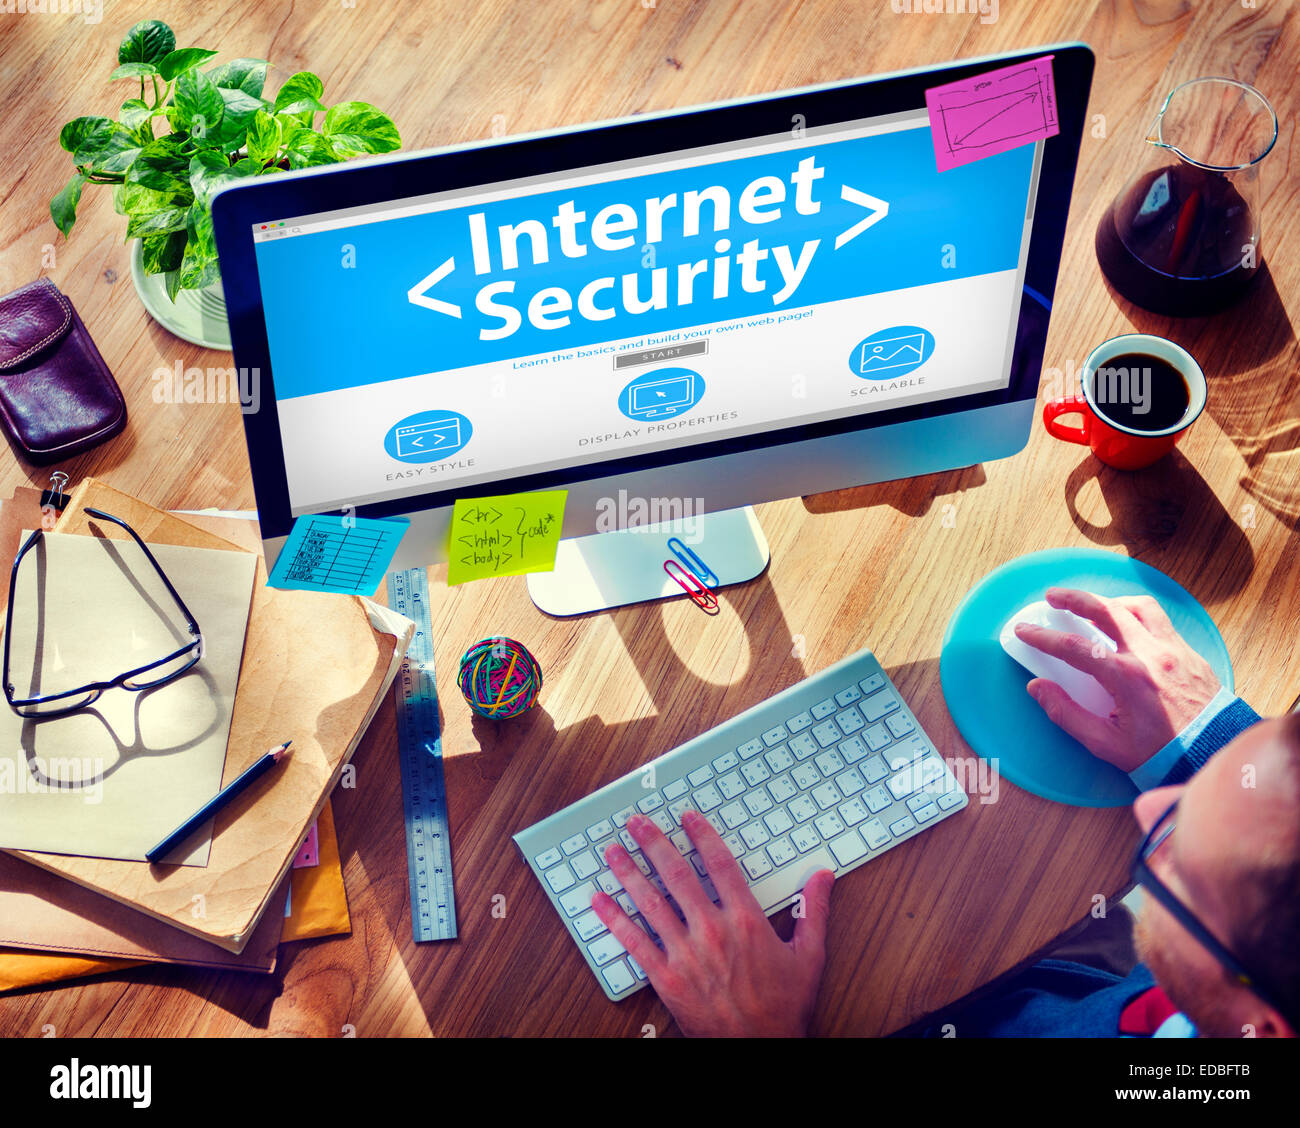 Digital Internet Security Protection Searching Concept Stock Photo